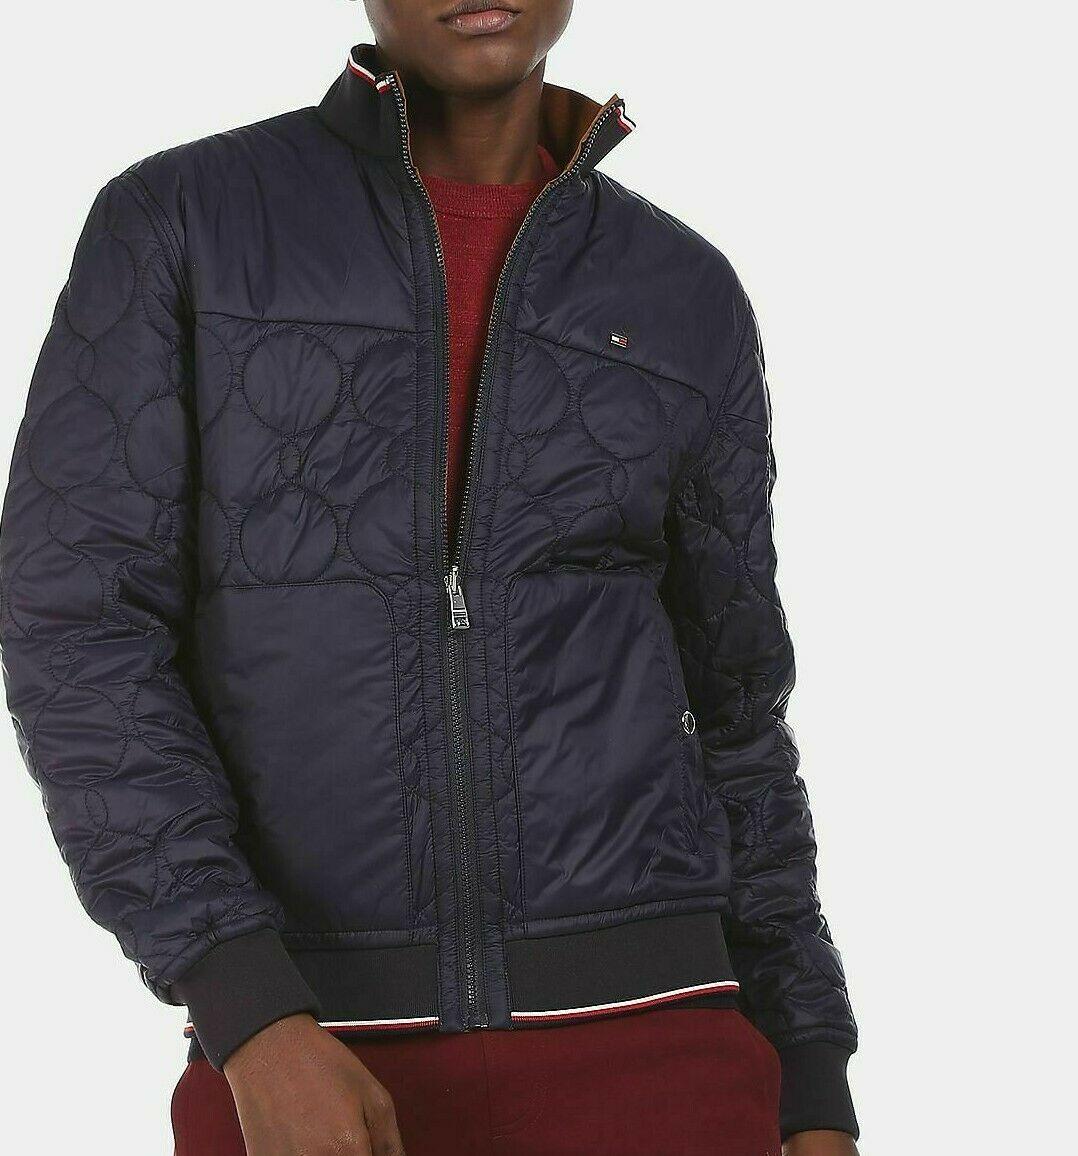 TOMMY HILFIGER Men Navy And Brown Reversible Onion Quilted Jacket Size M - SVNYFancy